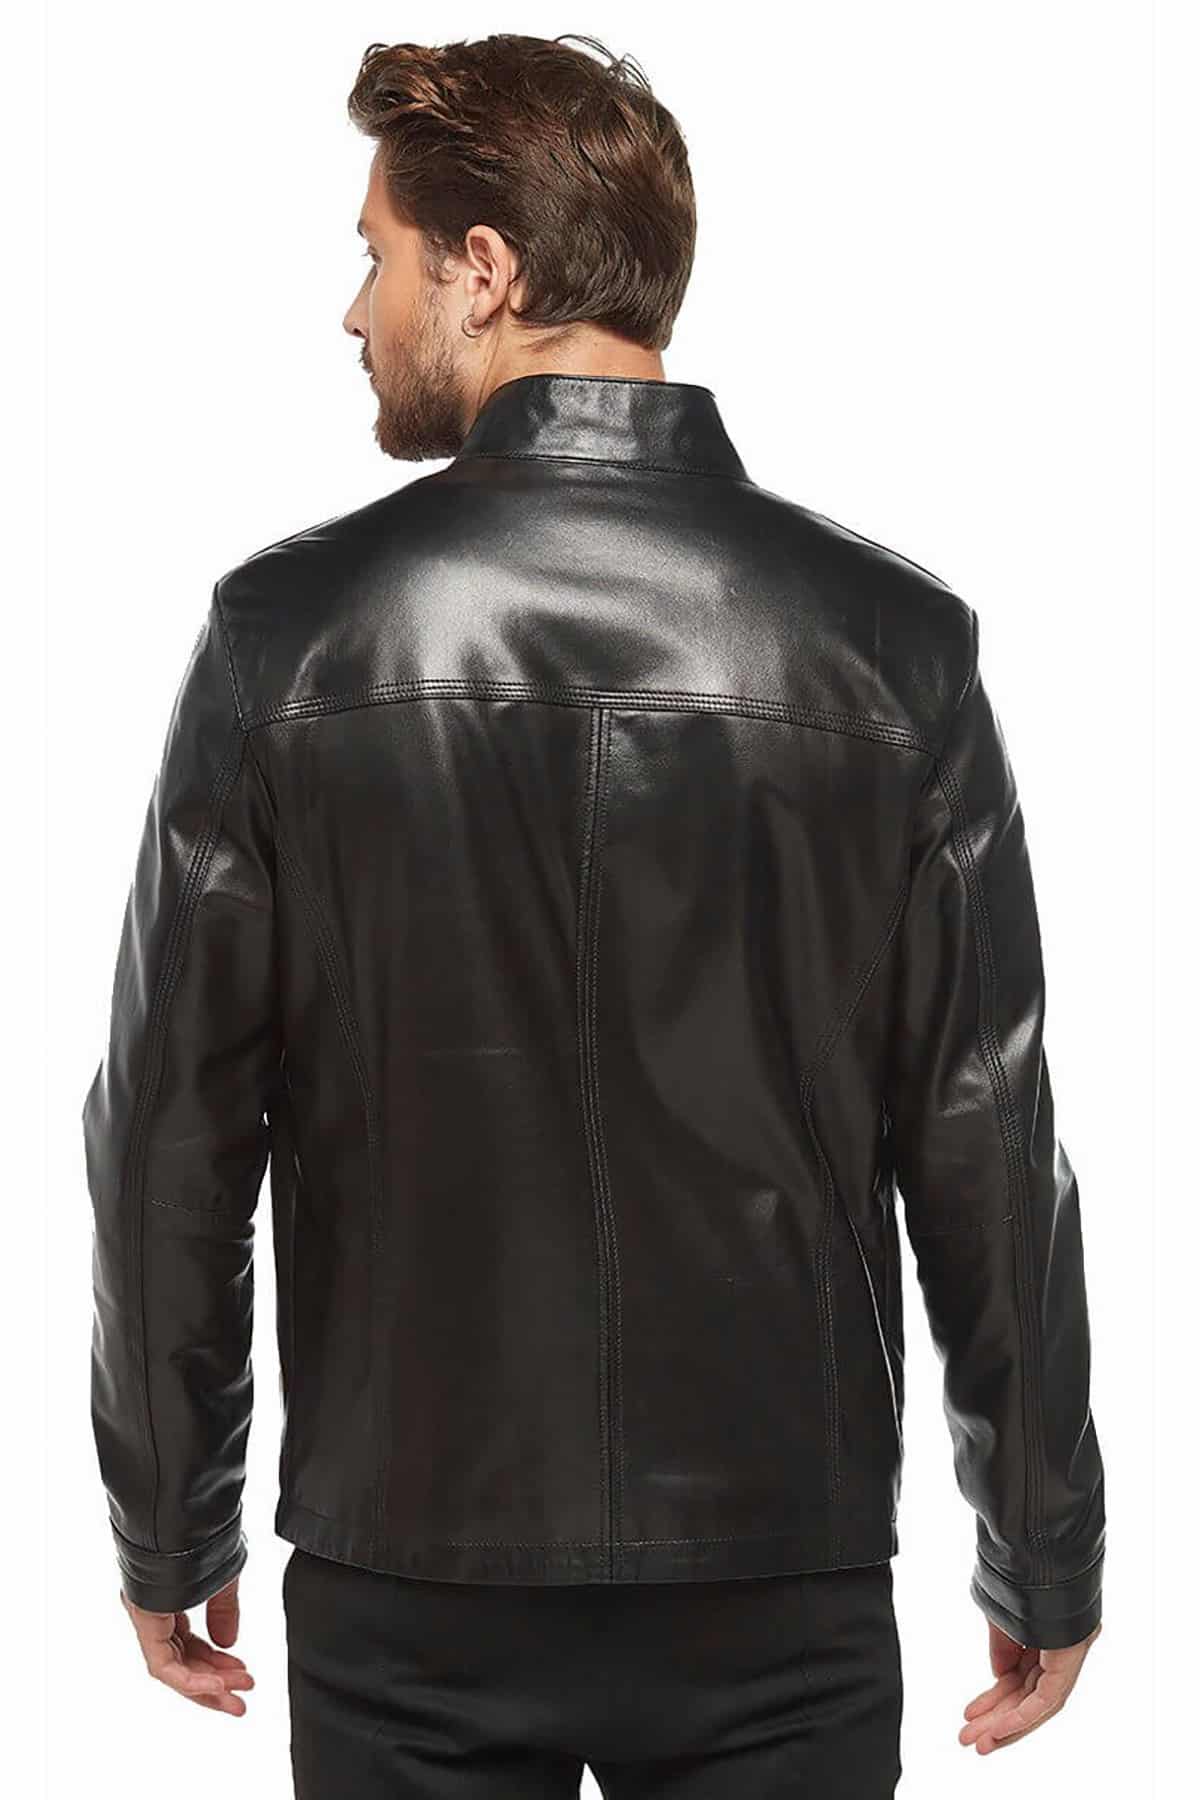 Men’s Classic Leather Jacket in Black2